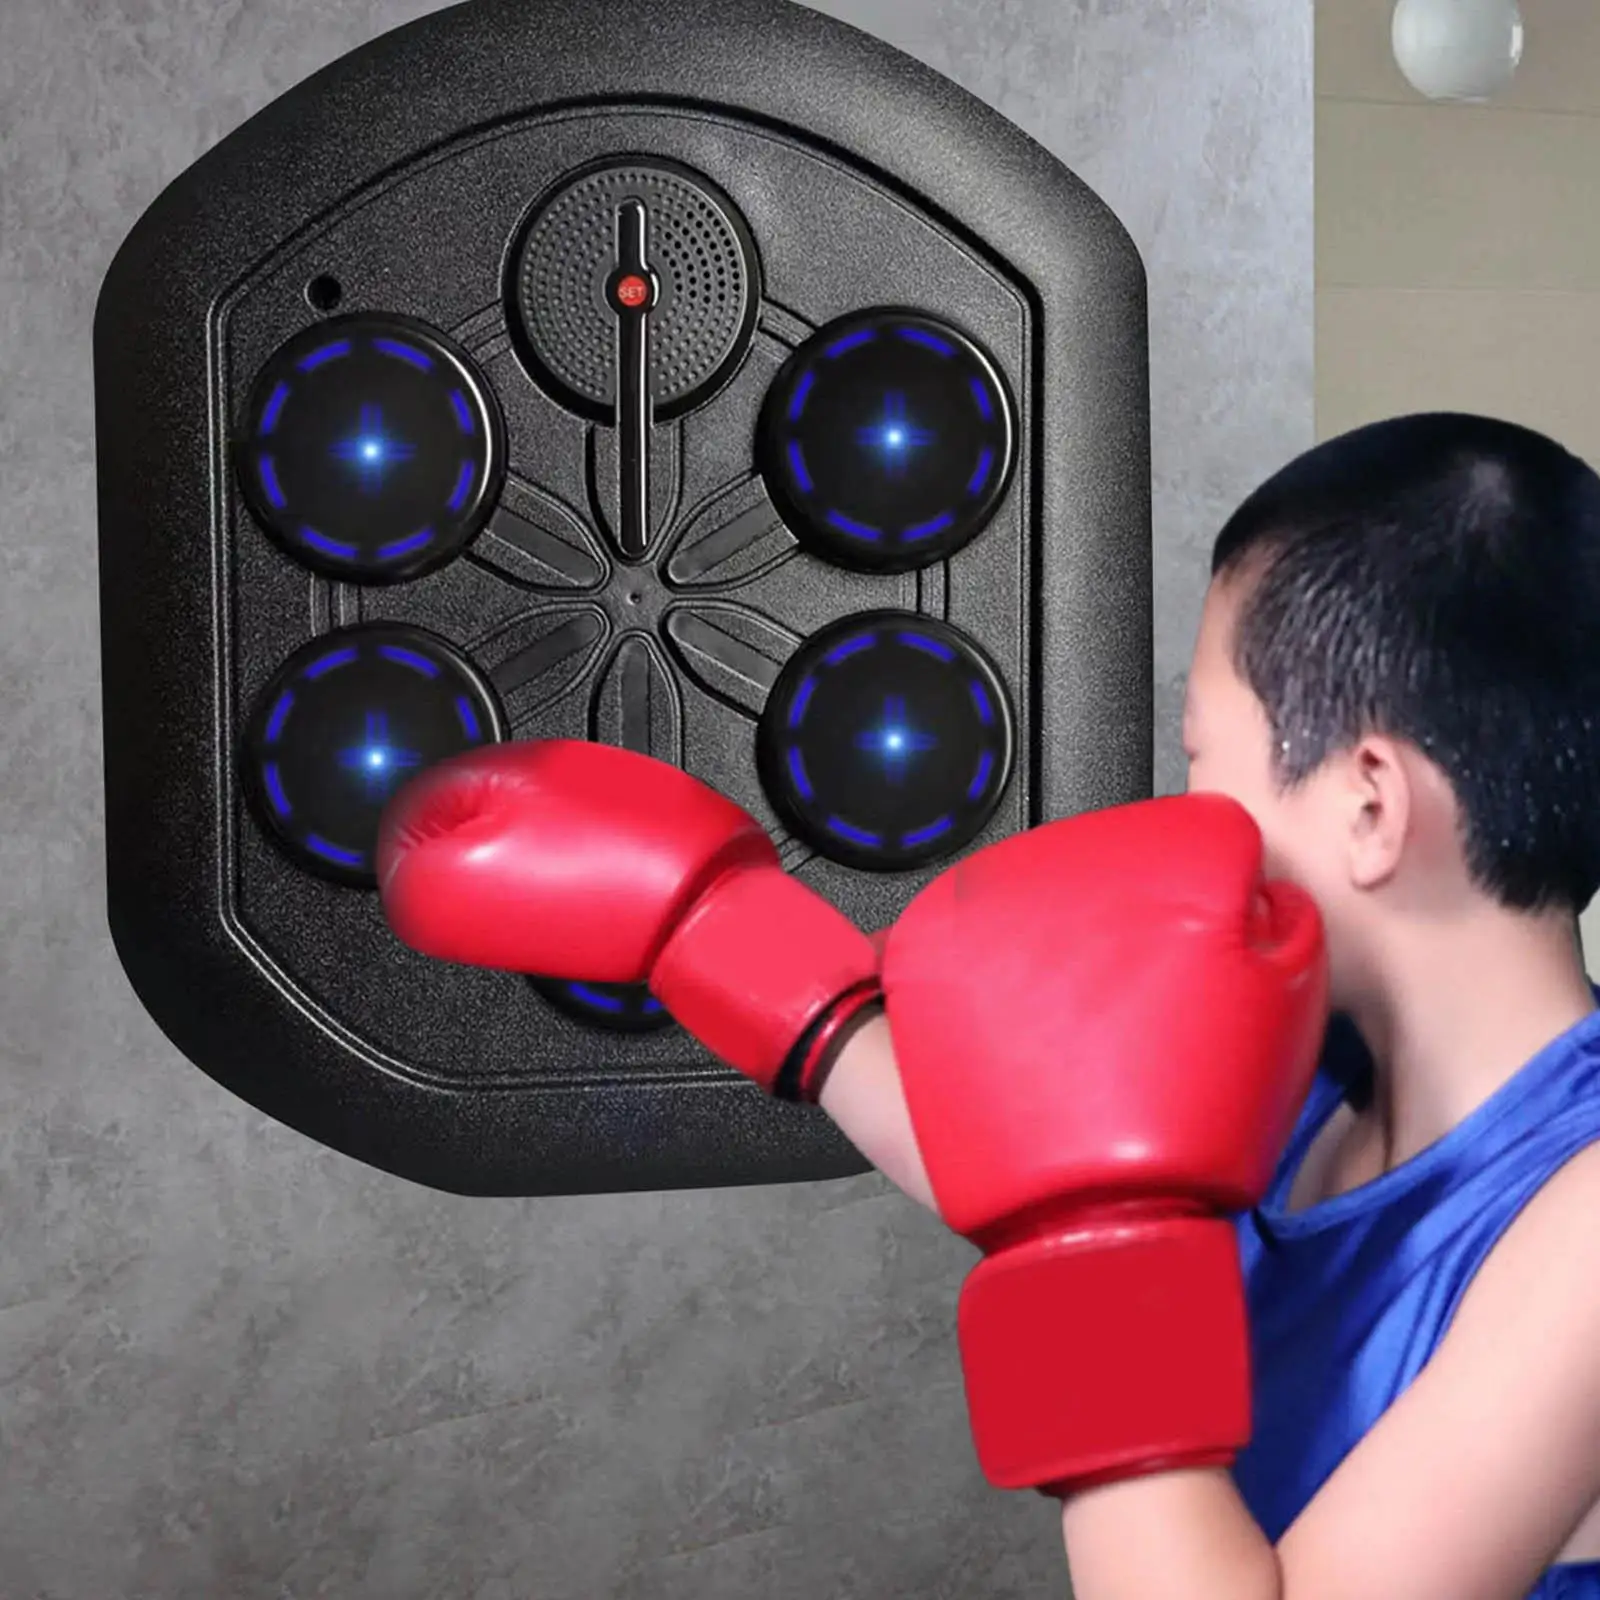 Music Boxing Training Machine Wall Mounted with Lights Smart Punching Pad for Youth Competitions Home Exercise Striking Skills